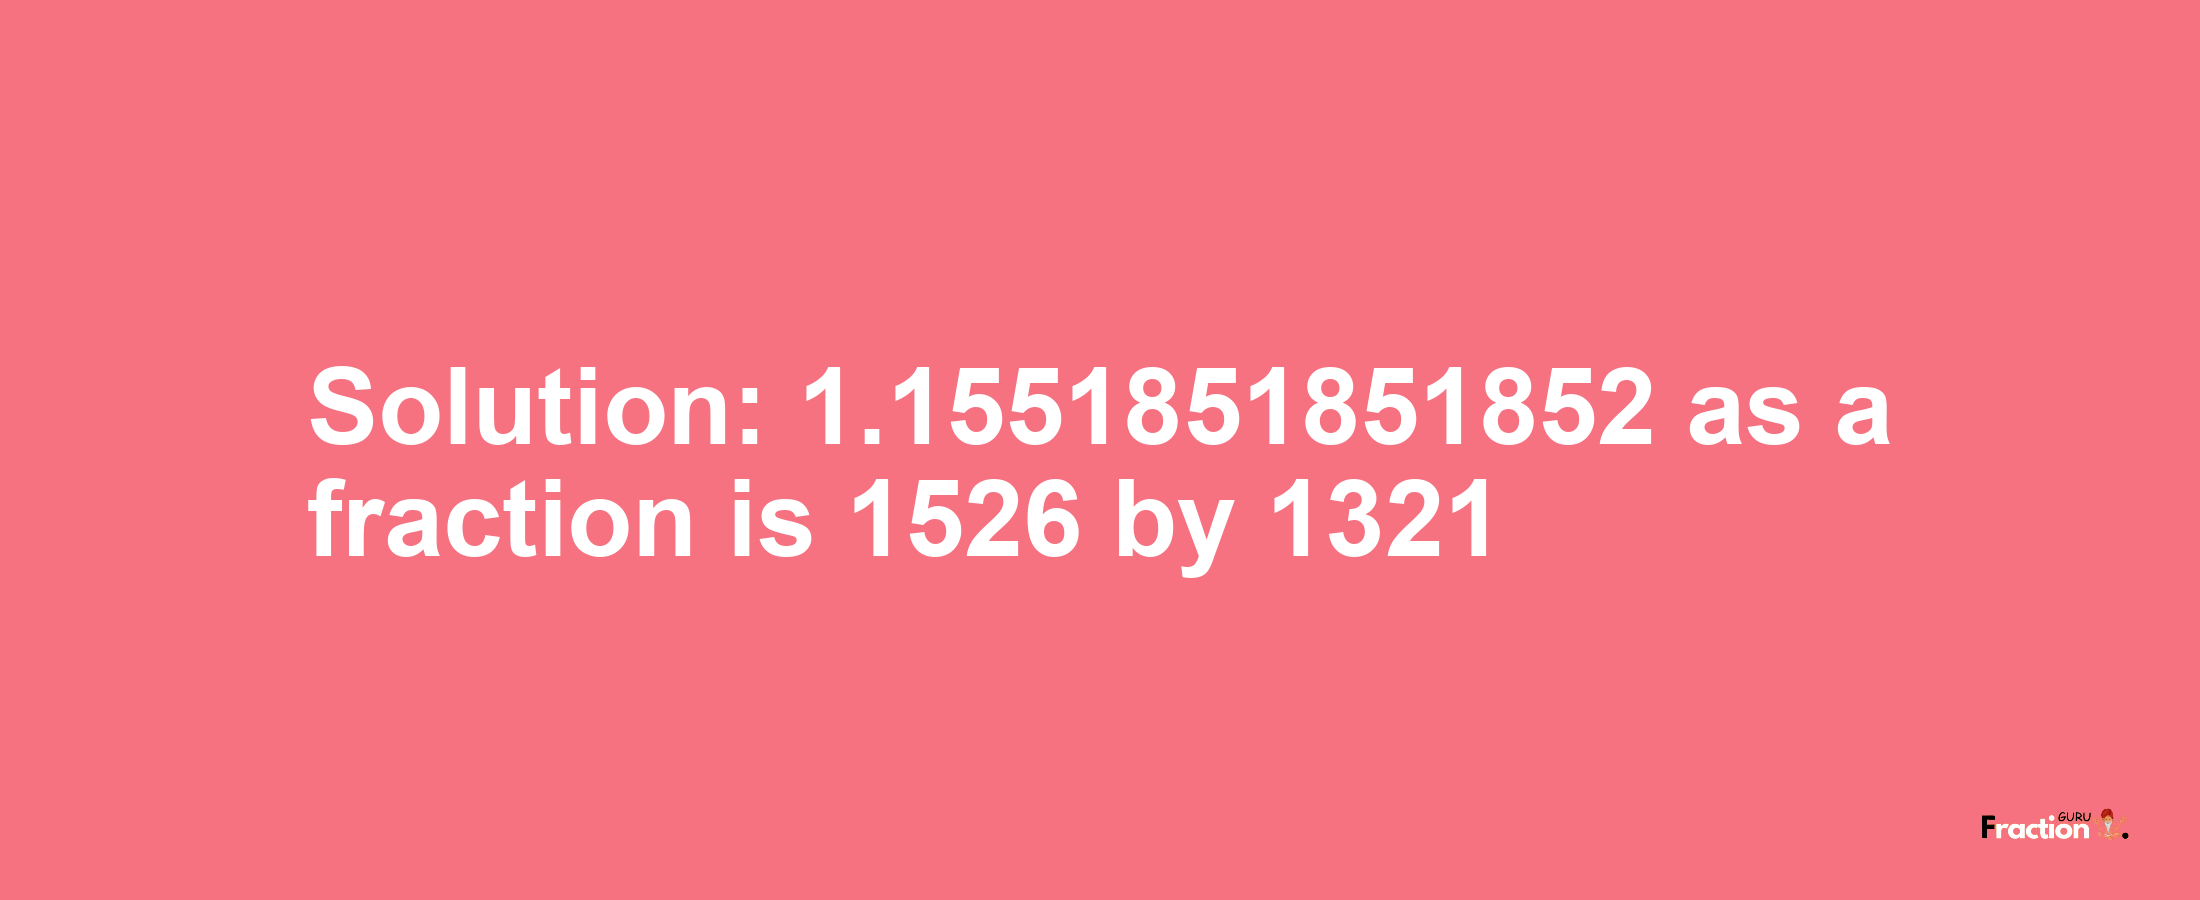 Solution:1.1551851851852 as a fraction is 1526/1321